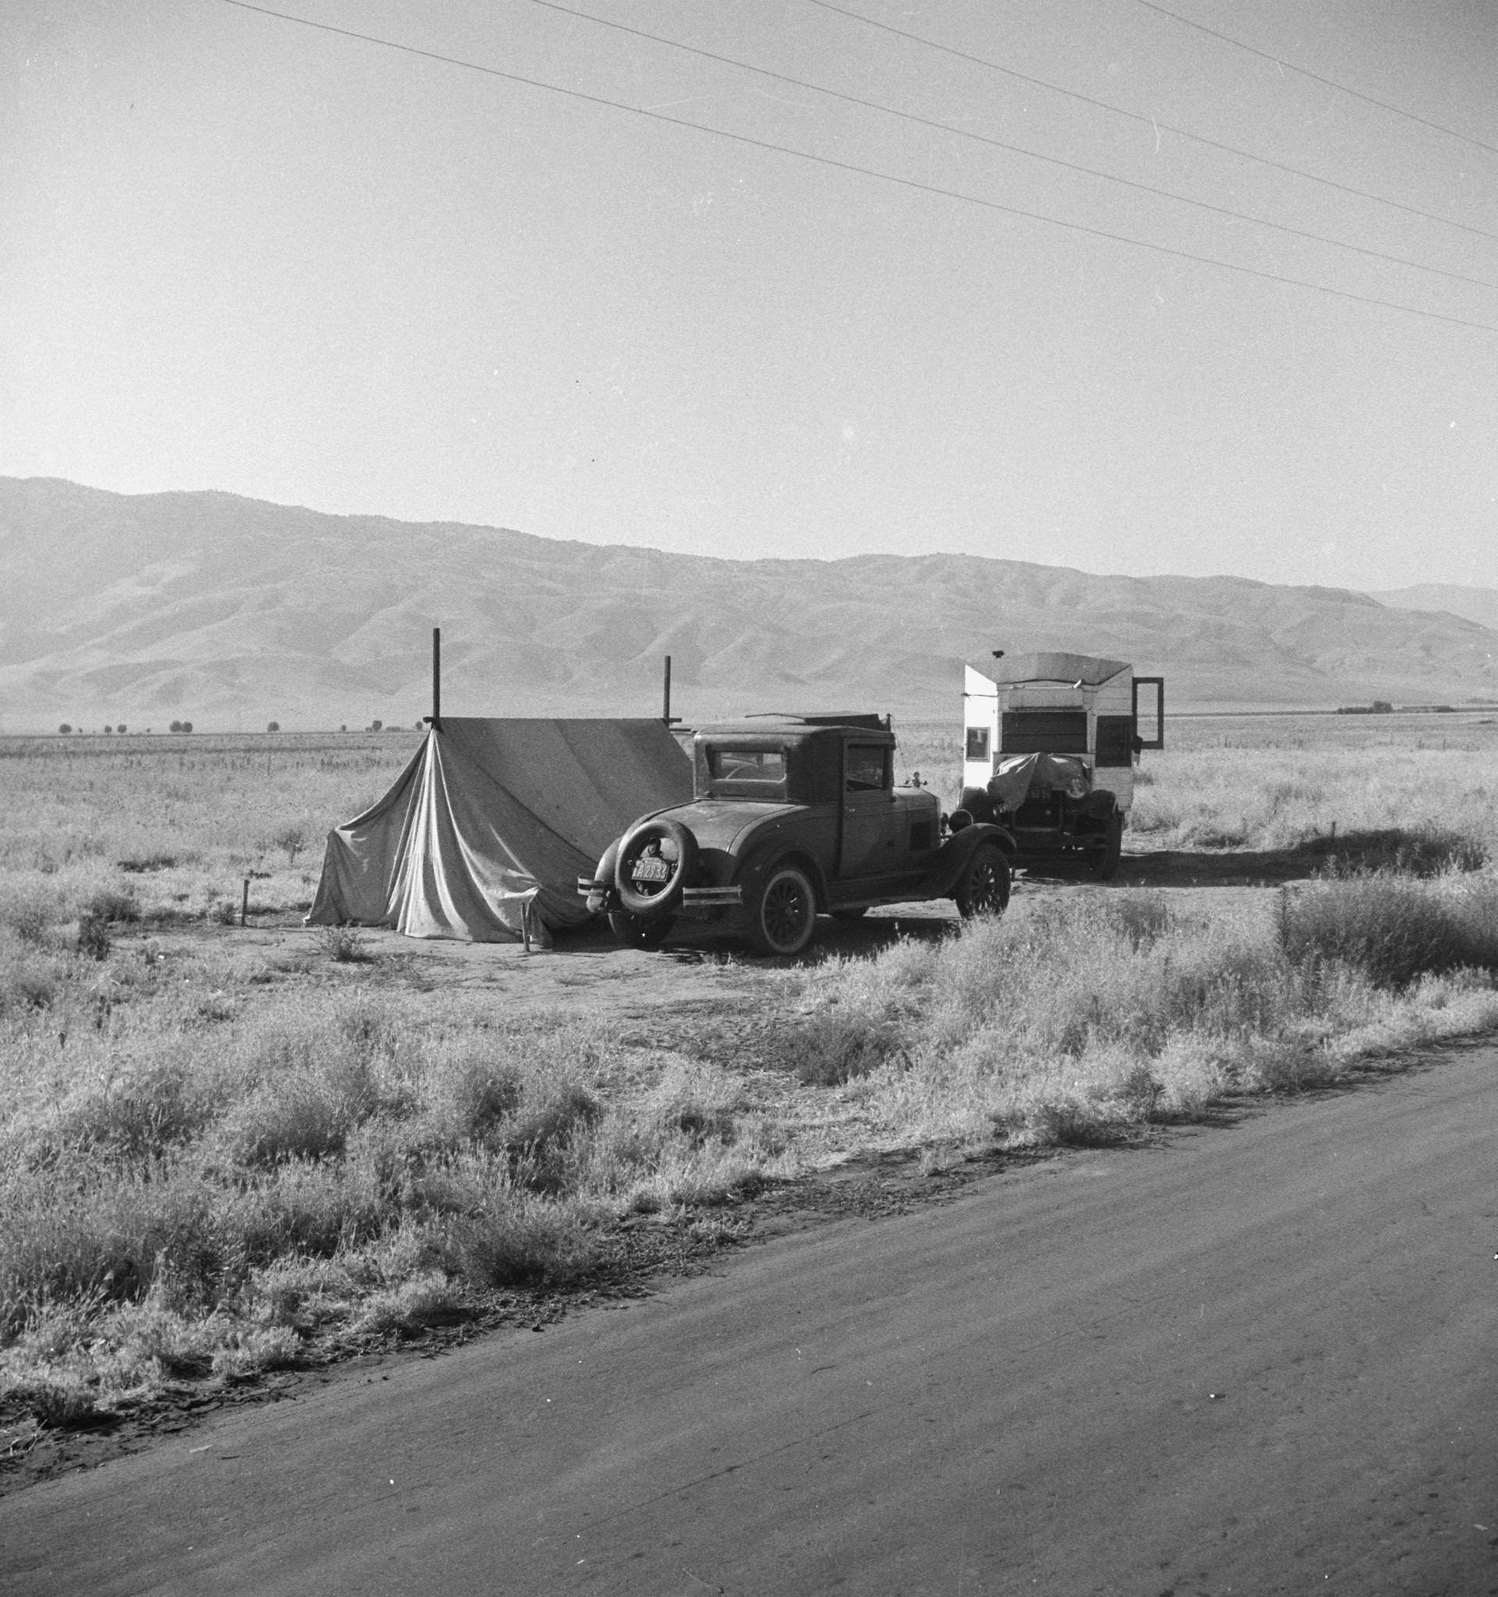 Transient potato workers camping along the highway. Near Shafter, California, 1930s